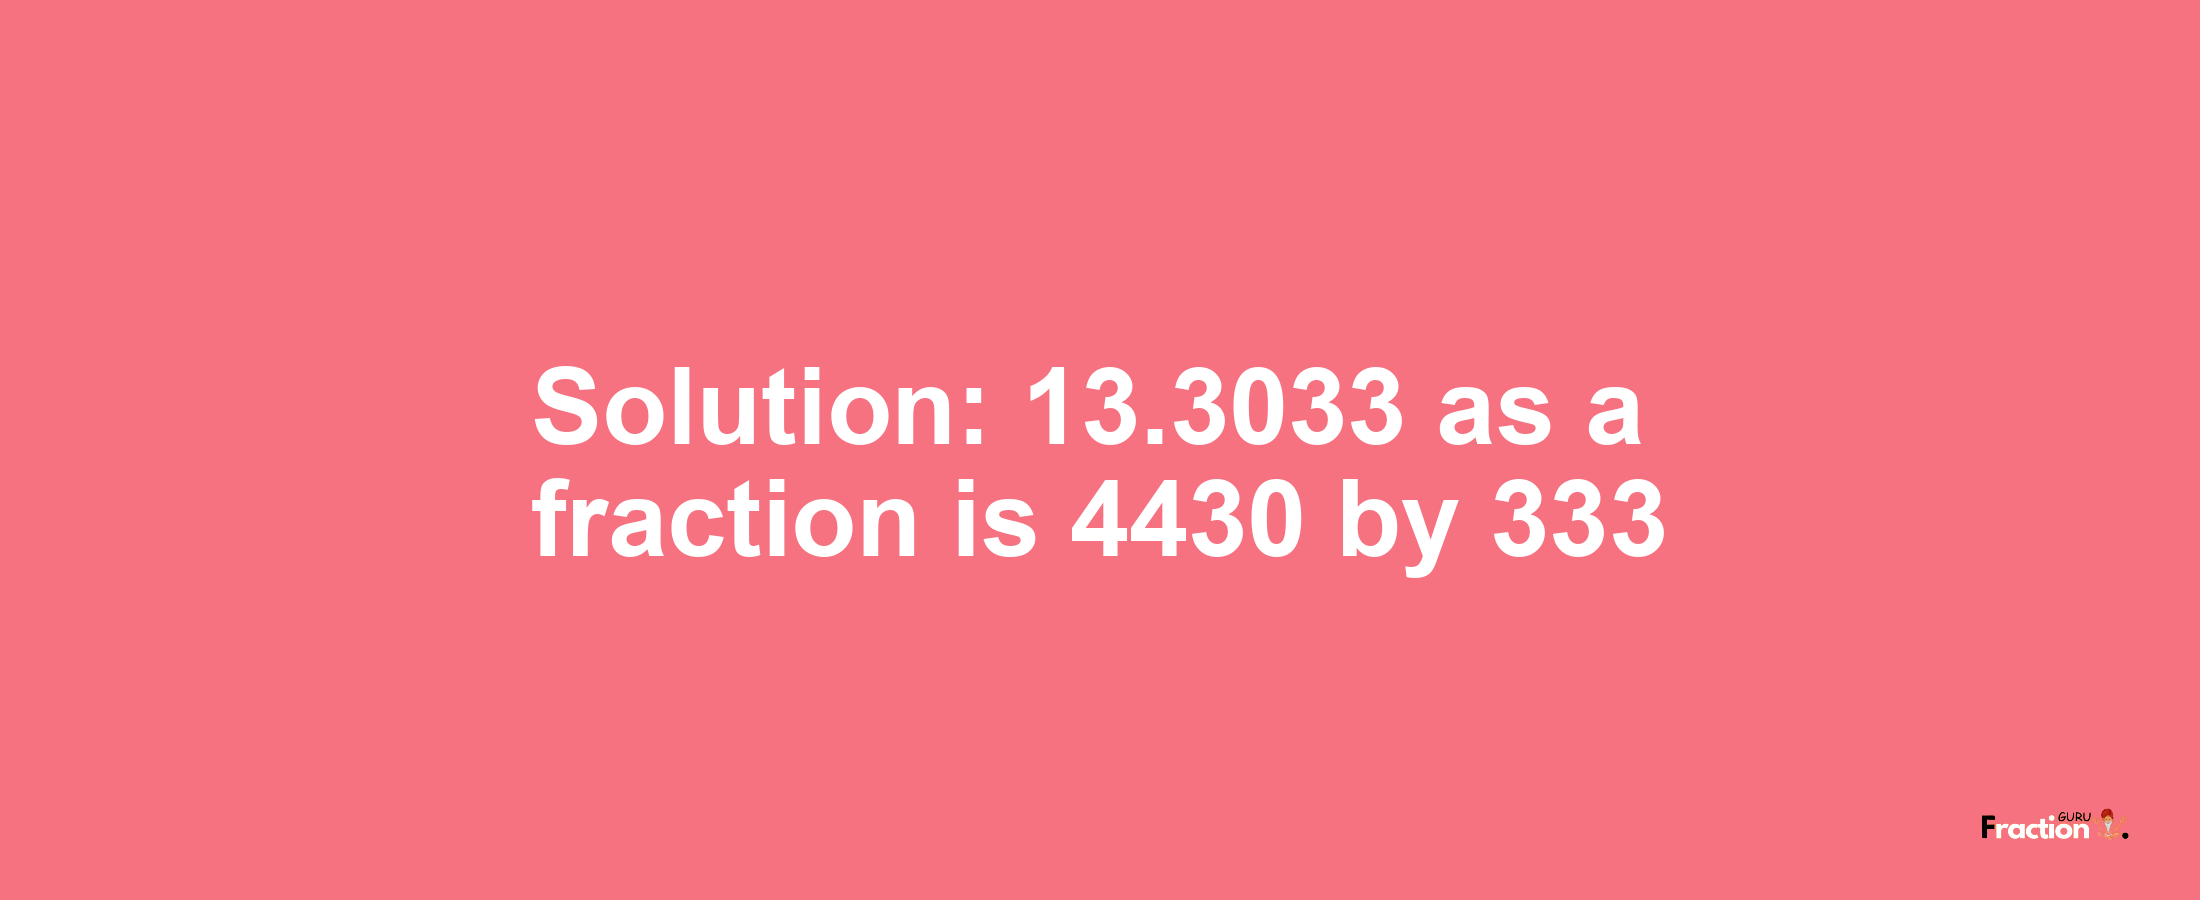 Solution:13.3033 as a fraction is 4430/333